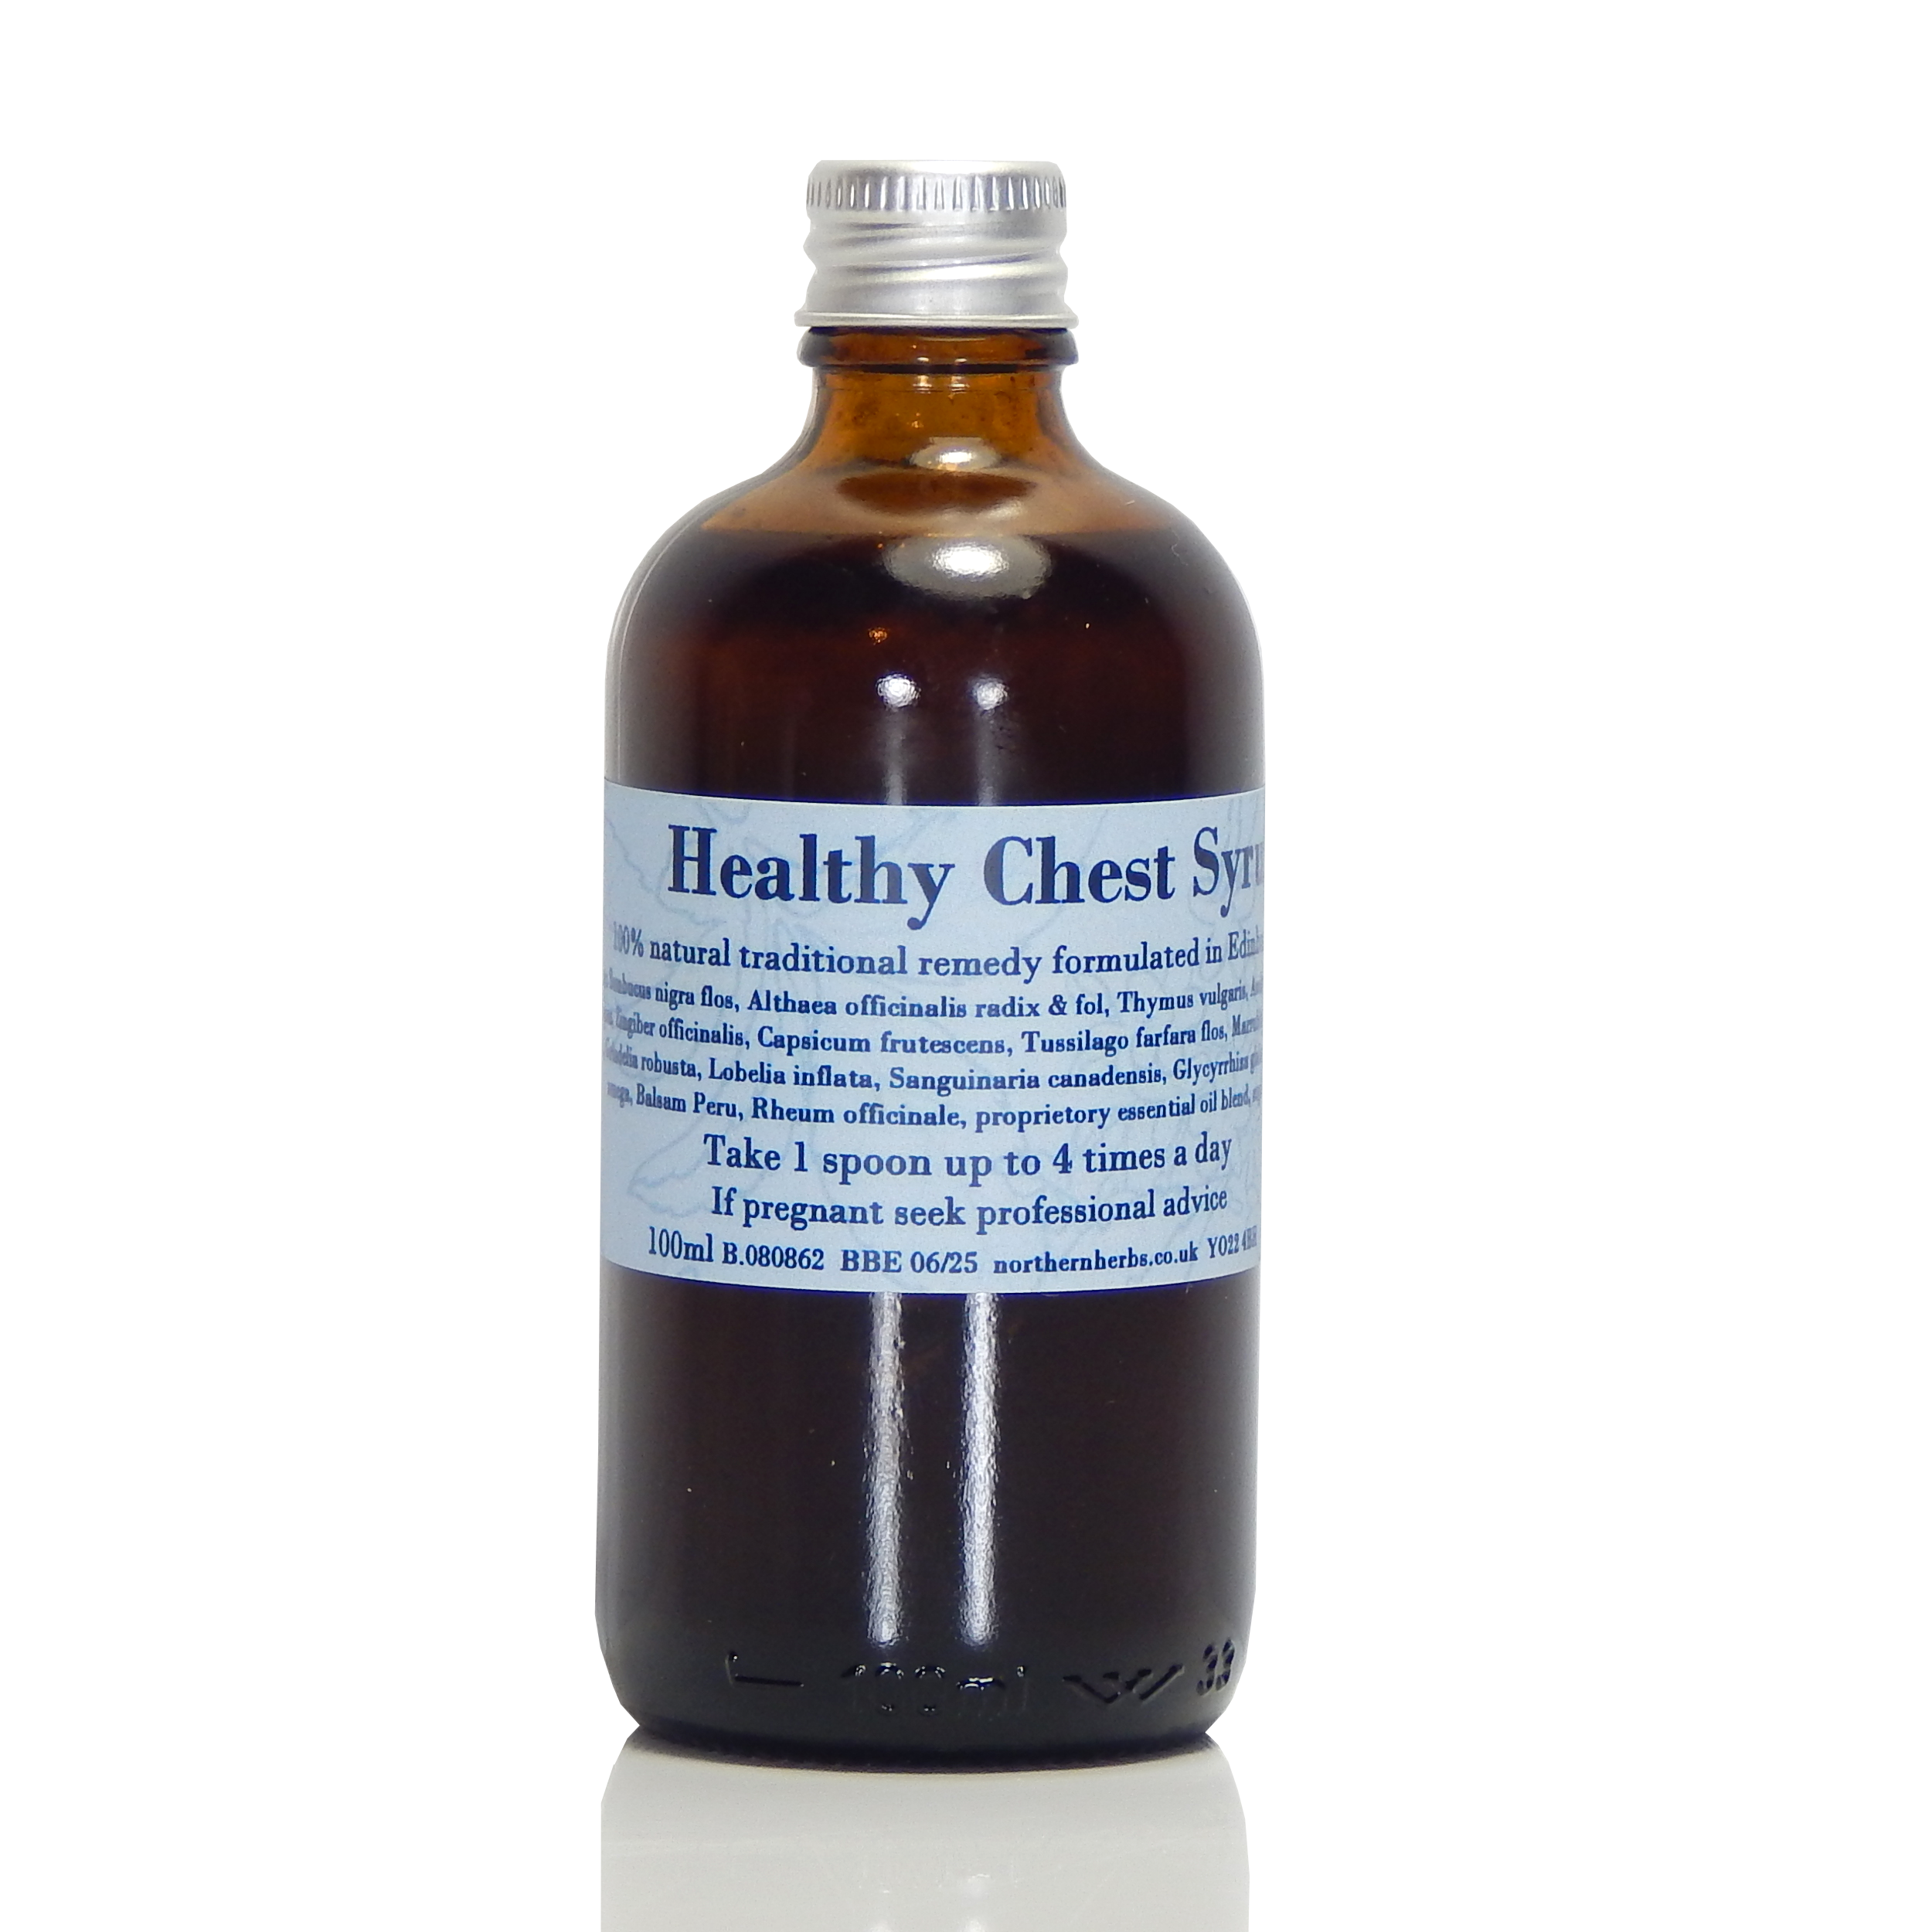 Healthy Chest Syrup